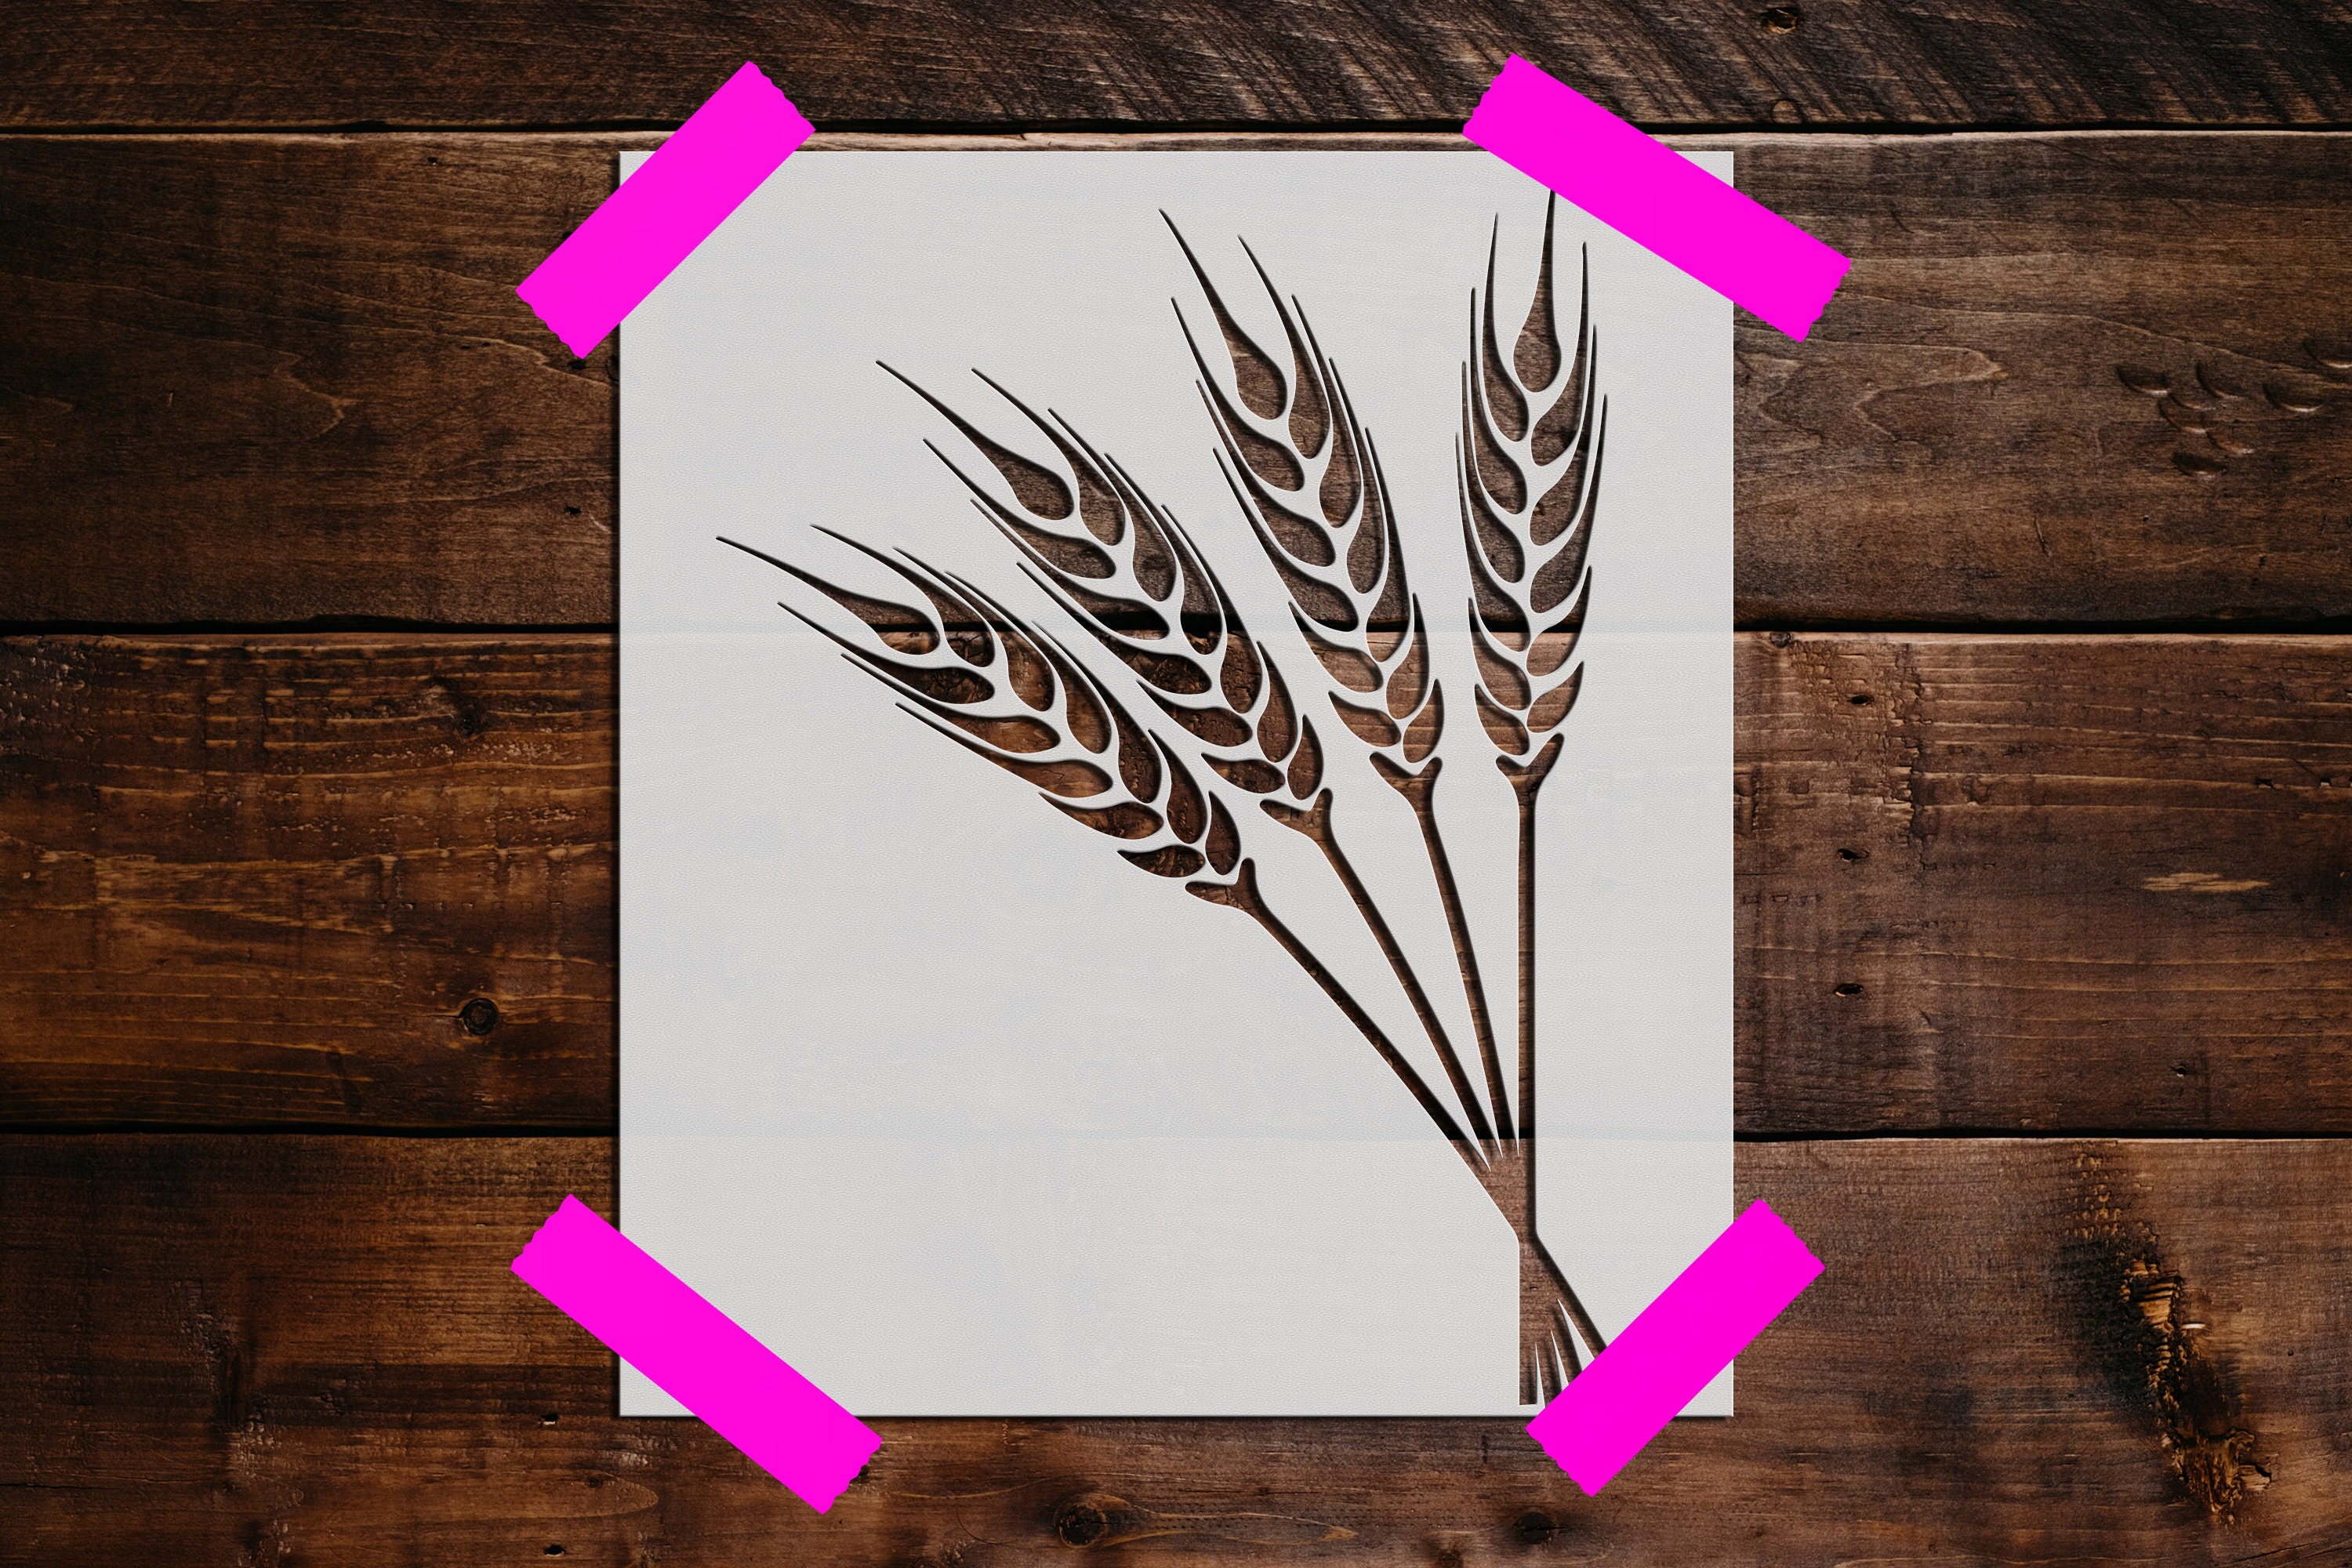 Wheat Doodles Cliparts, Stock Vector and Royalty Free Wheat Doodles  Illustrations